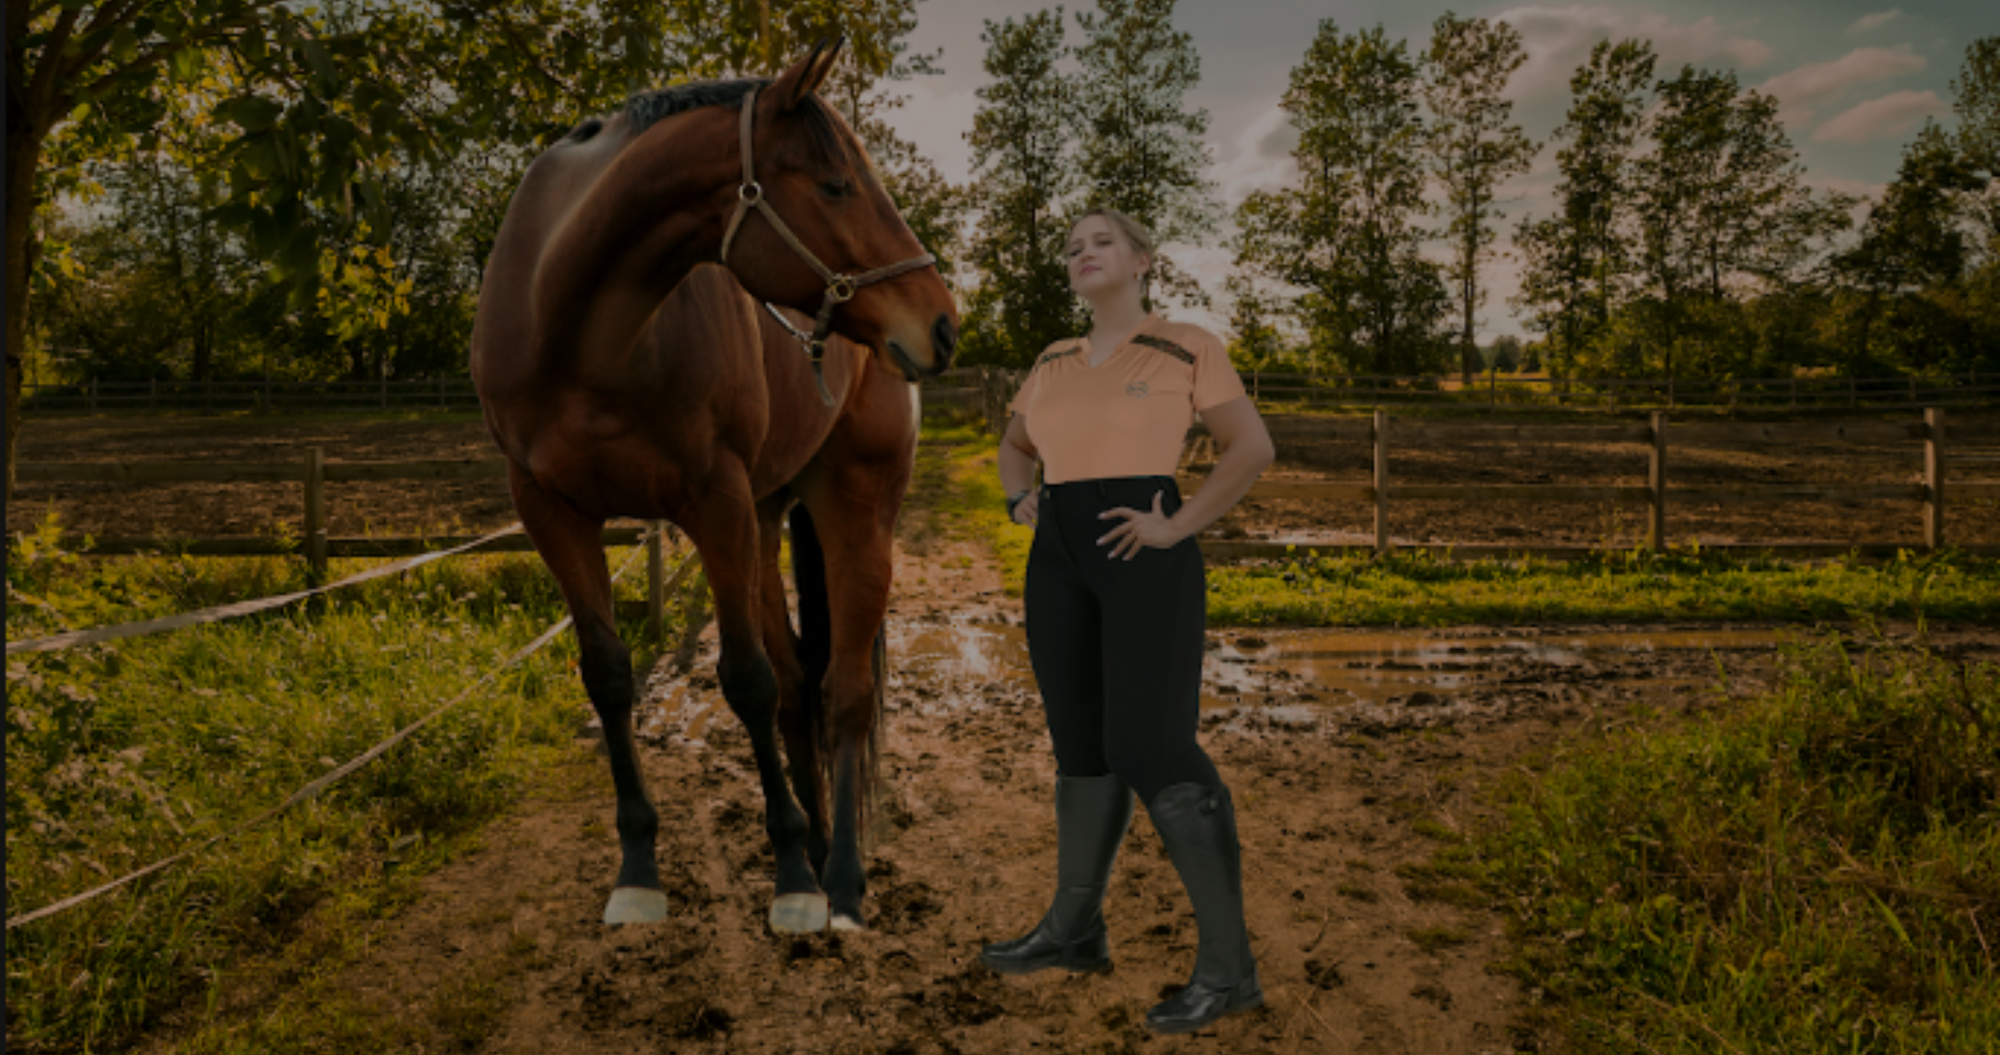 Woman standing next to bay horse in muddy field wearing plus size equestrian clothing and plus size riding breeches